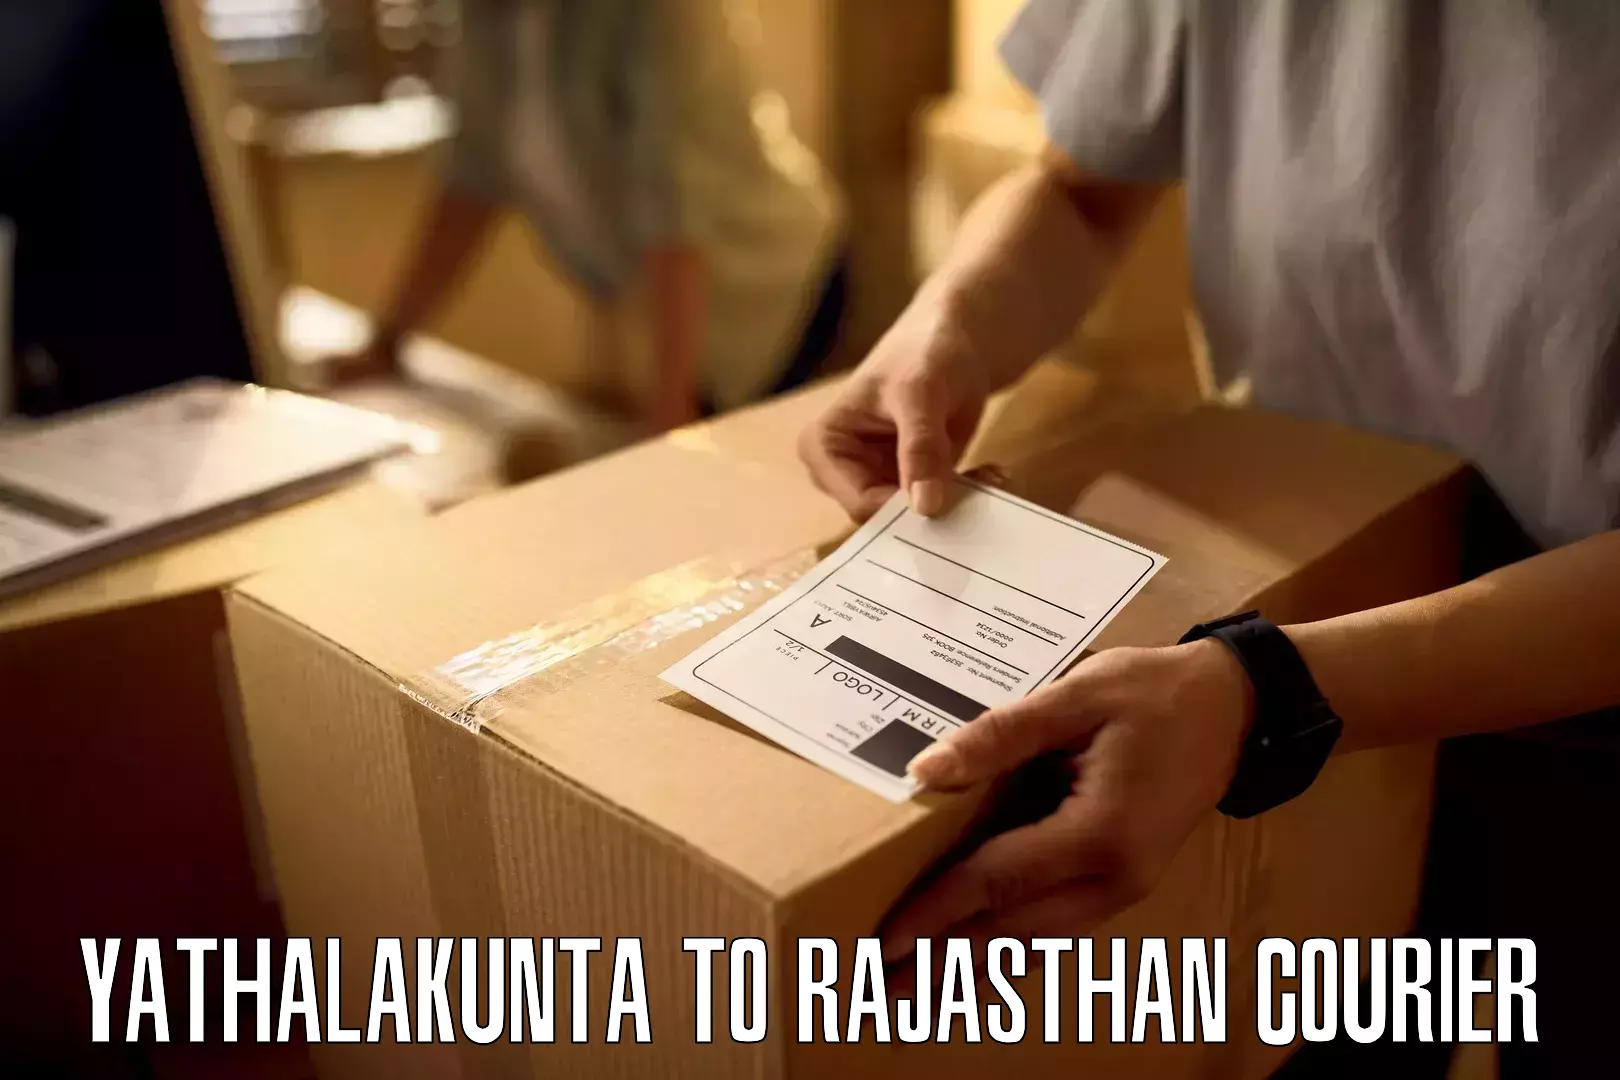 Express delivery solutions Yathalakunta to Mathania